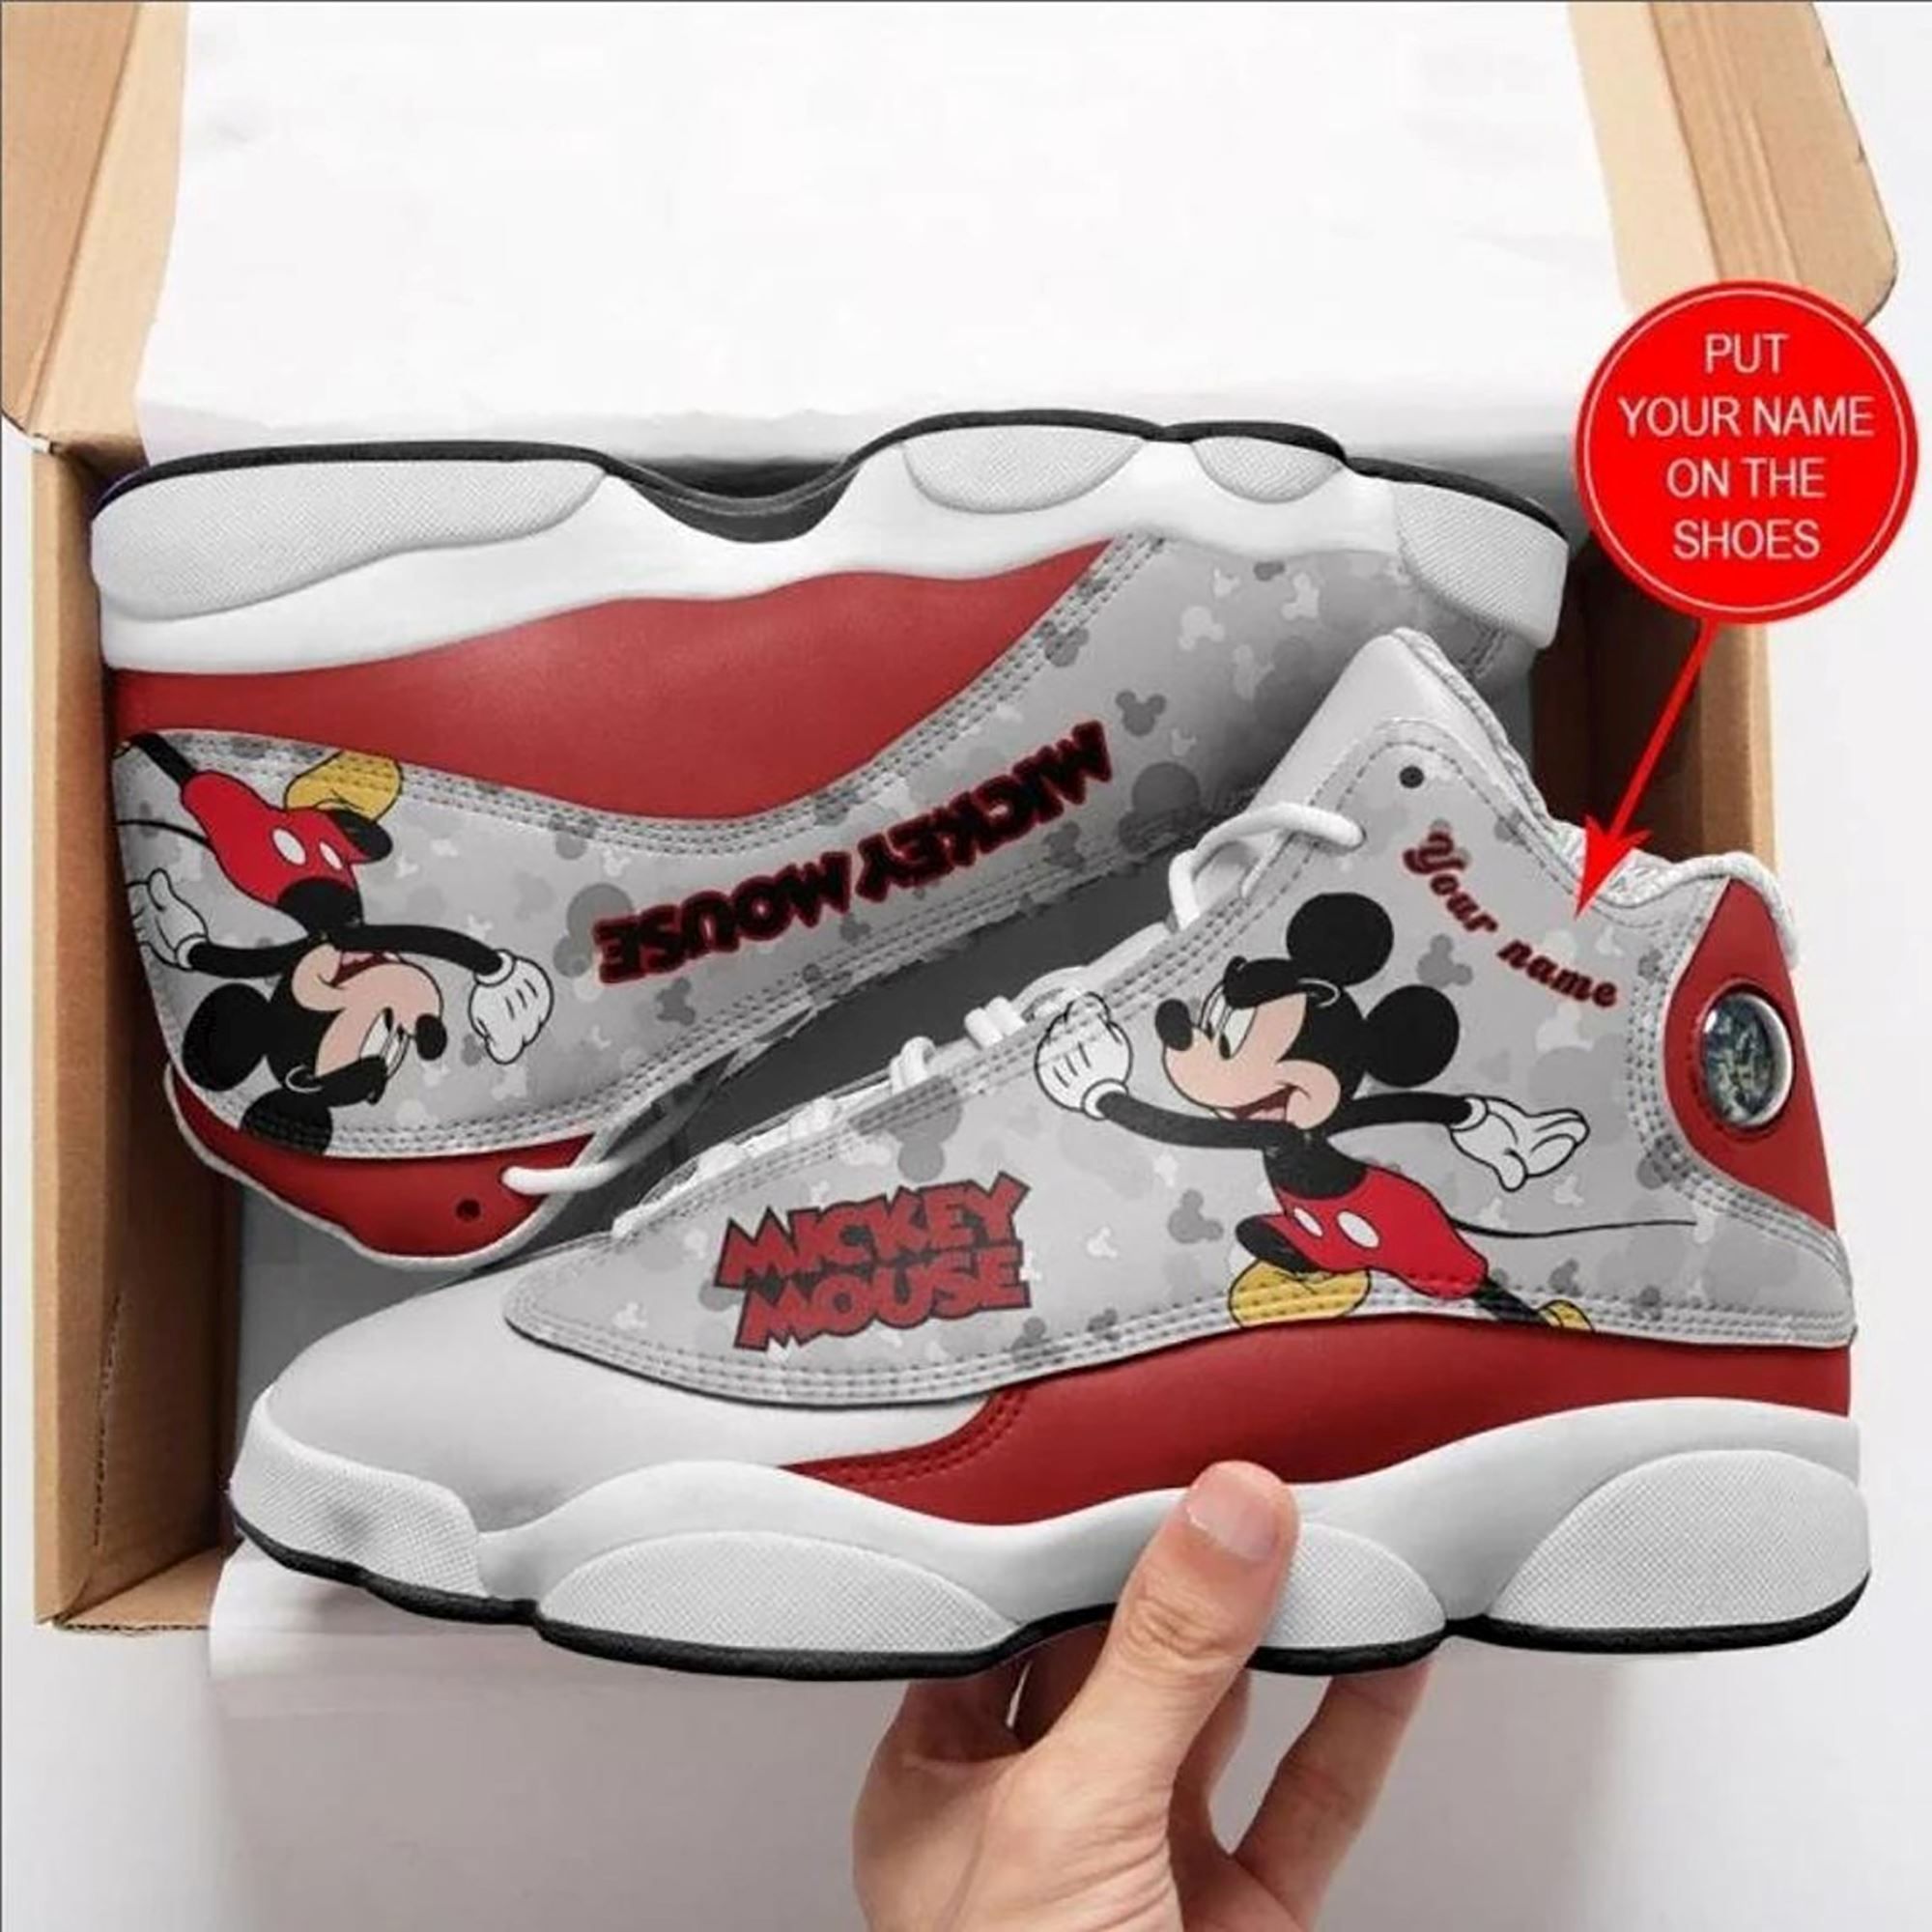 Mickey mouse shoes air jordan 13 personalized shoes custom name shoes printed shoes - women / us 6